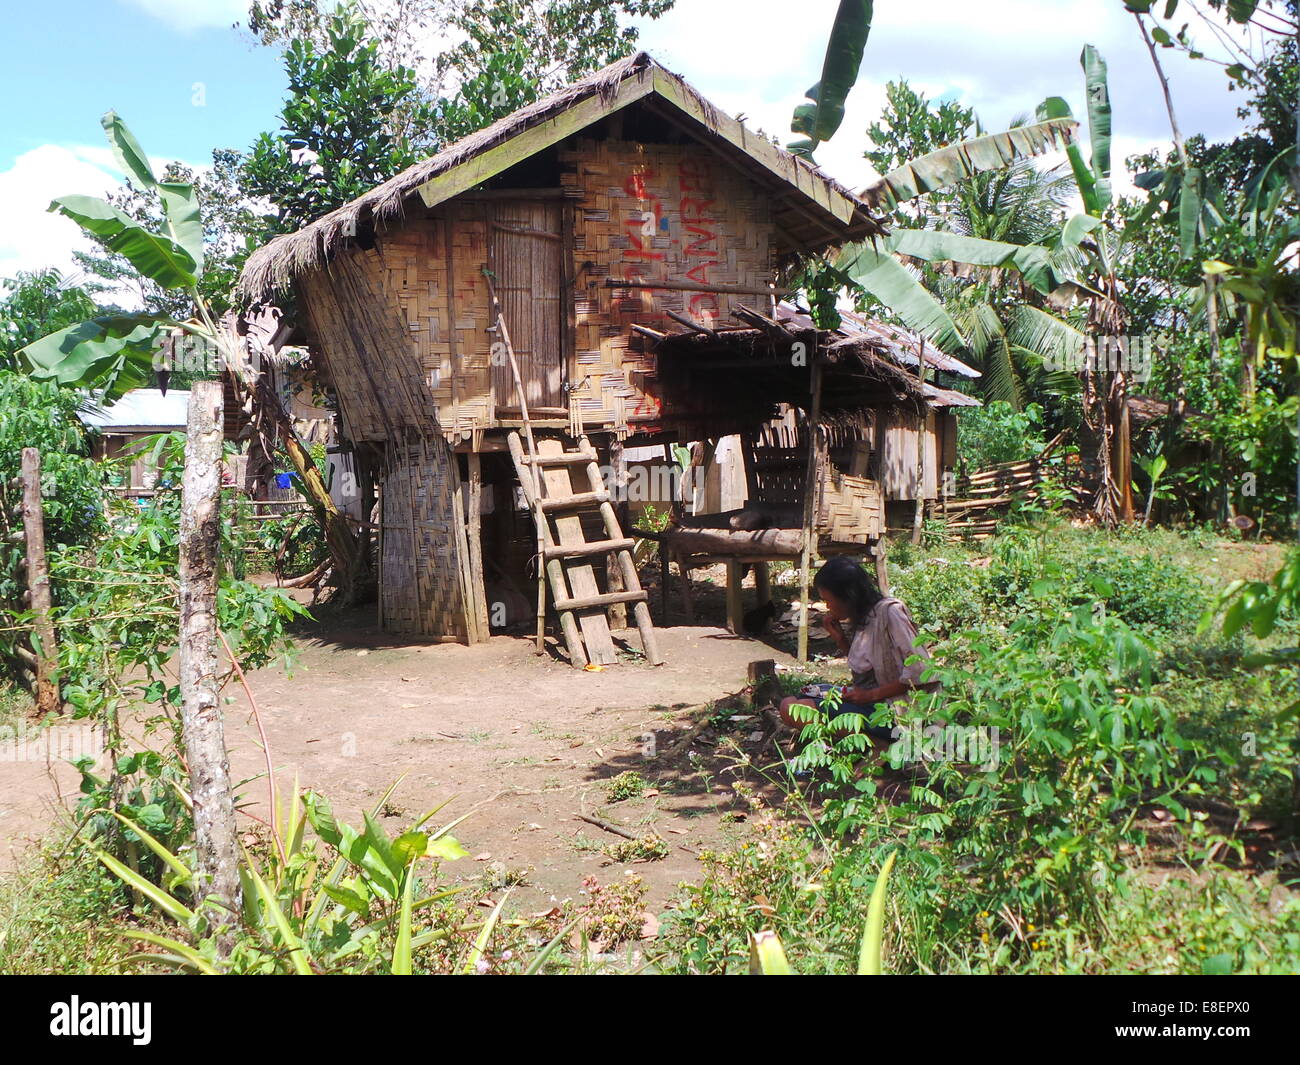 A native house of the Subanen tribe in Dumingag, Zamboanga del Sur. Subanen is one of the endangered tribes in Mindanao. Dumingag town in Zamboanga del Sur province in the island of Mindanao is adhering in preserving the cultures and traditions of their town, as a matter of fact during town fiestas, pop dance are prohibited and traditional songs and dances are promoted to alleviate their cultural pride. © Sherbien Dacalanio/Pacific Press/Alamy Live News Stock Photo